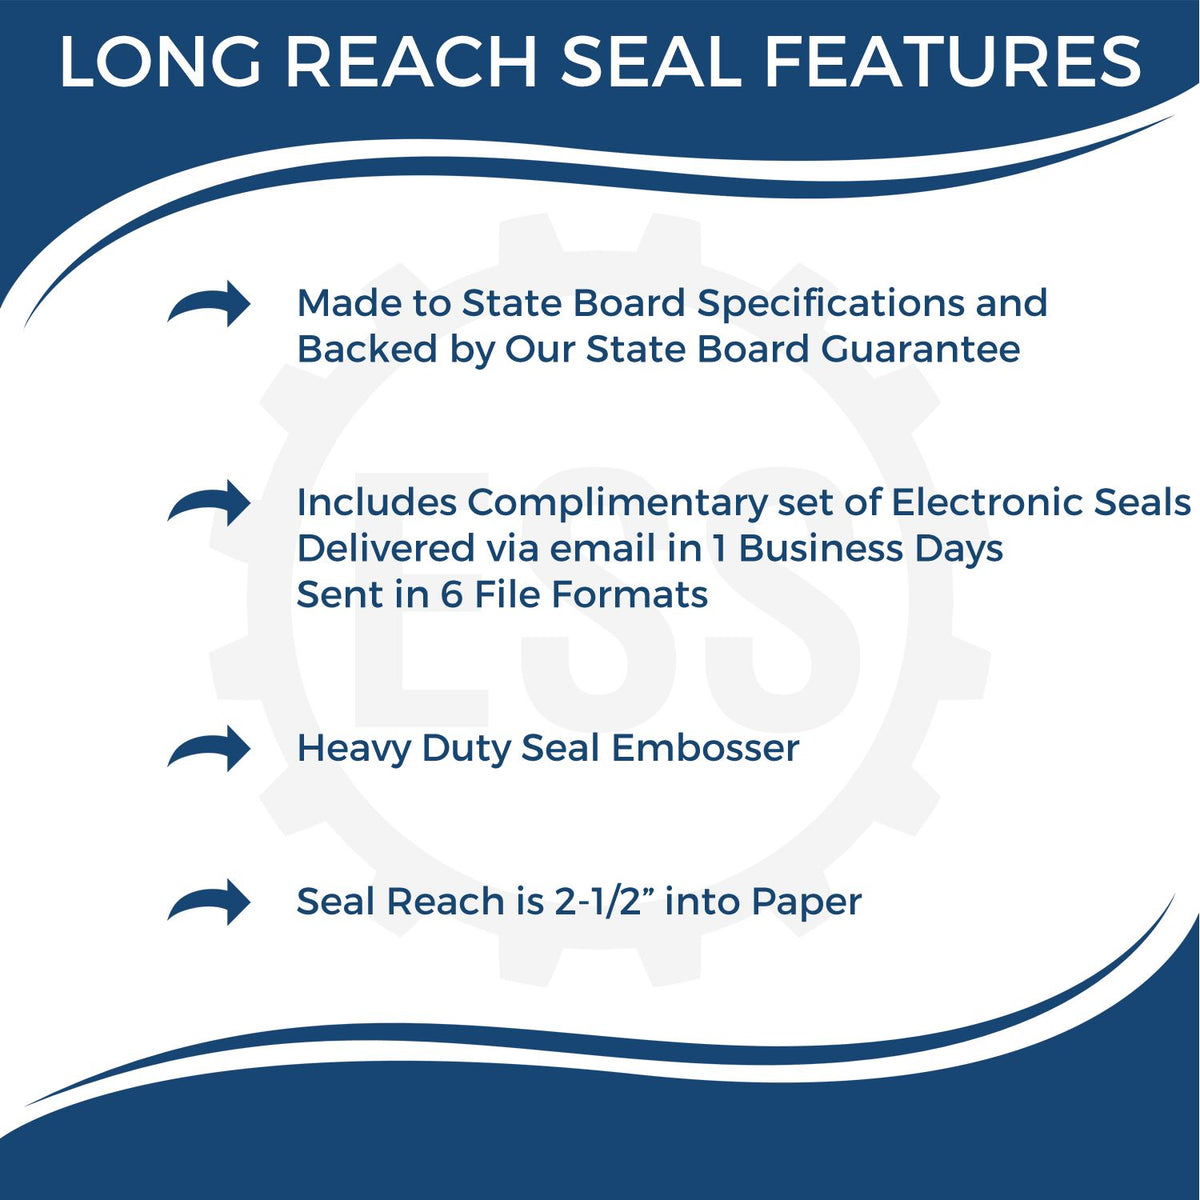 A picture of an infographic highlighting the selling points for the Long Reach Georgia Land Surveyor Seal